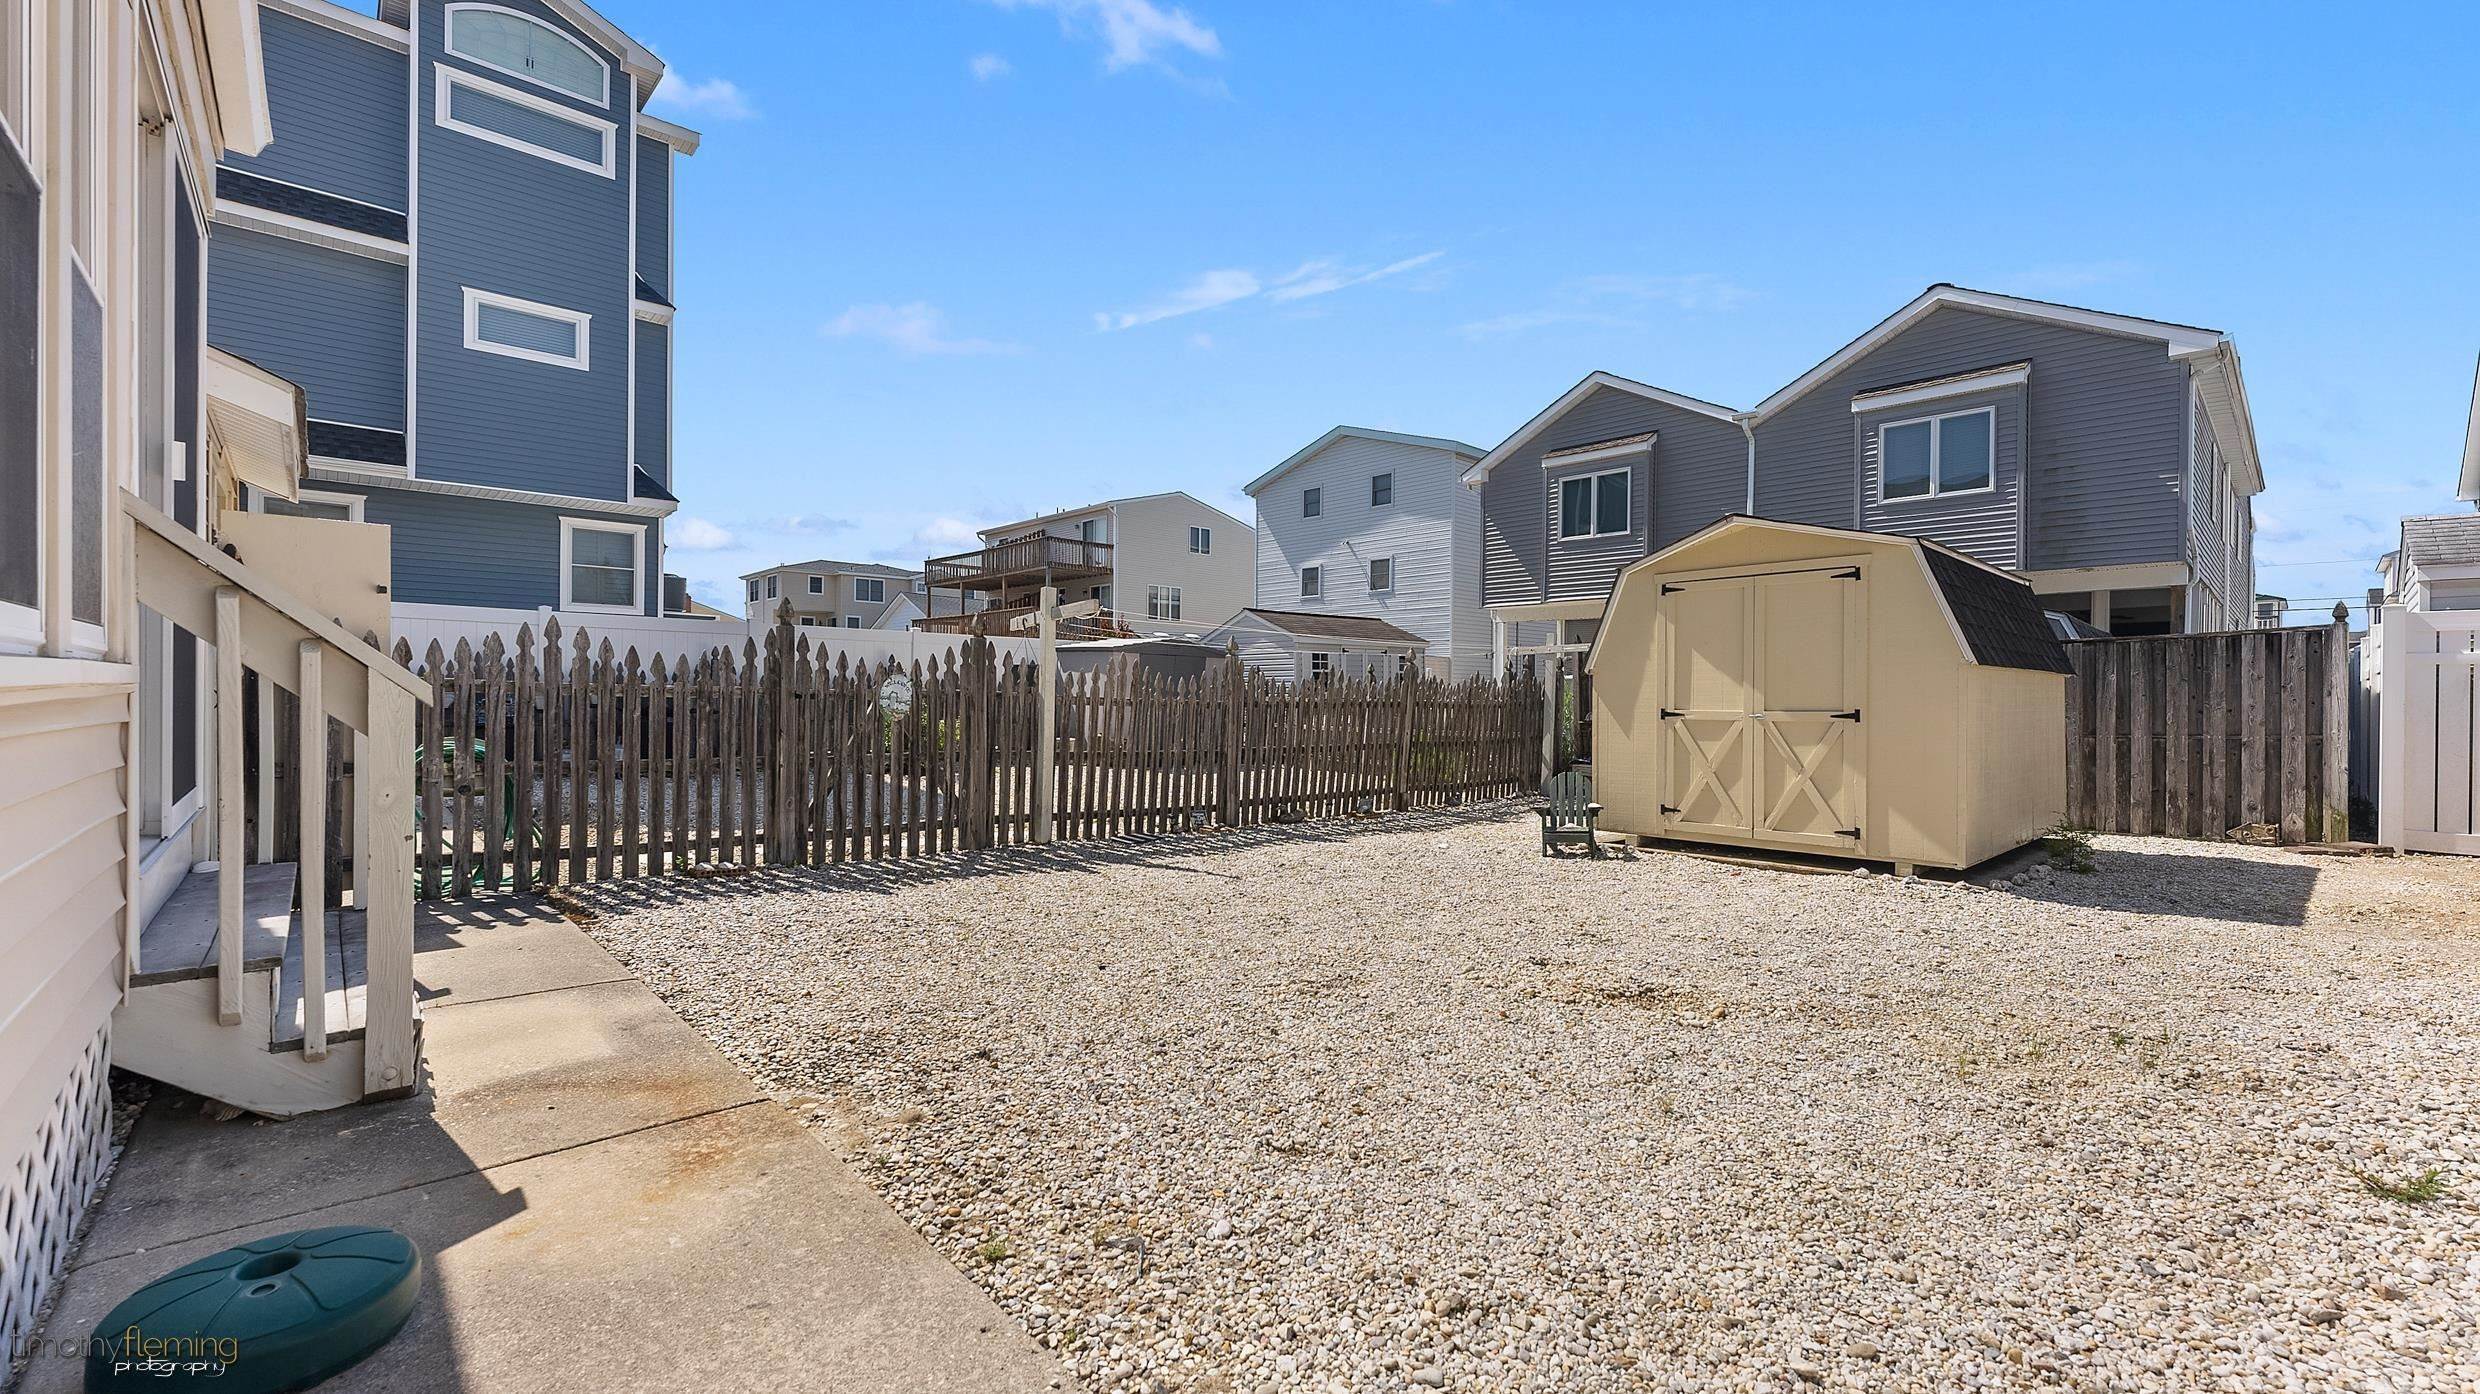 11. Condominiums for Sale at 226 78th Street Sea Isle City, New Jersey 08243 United States